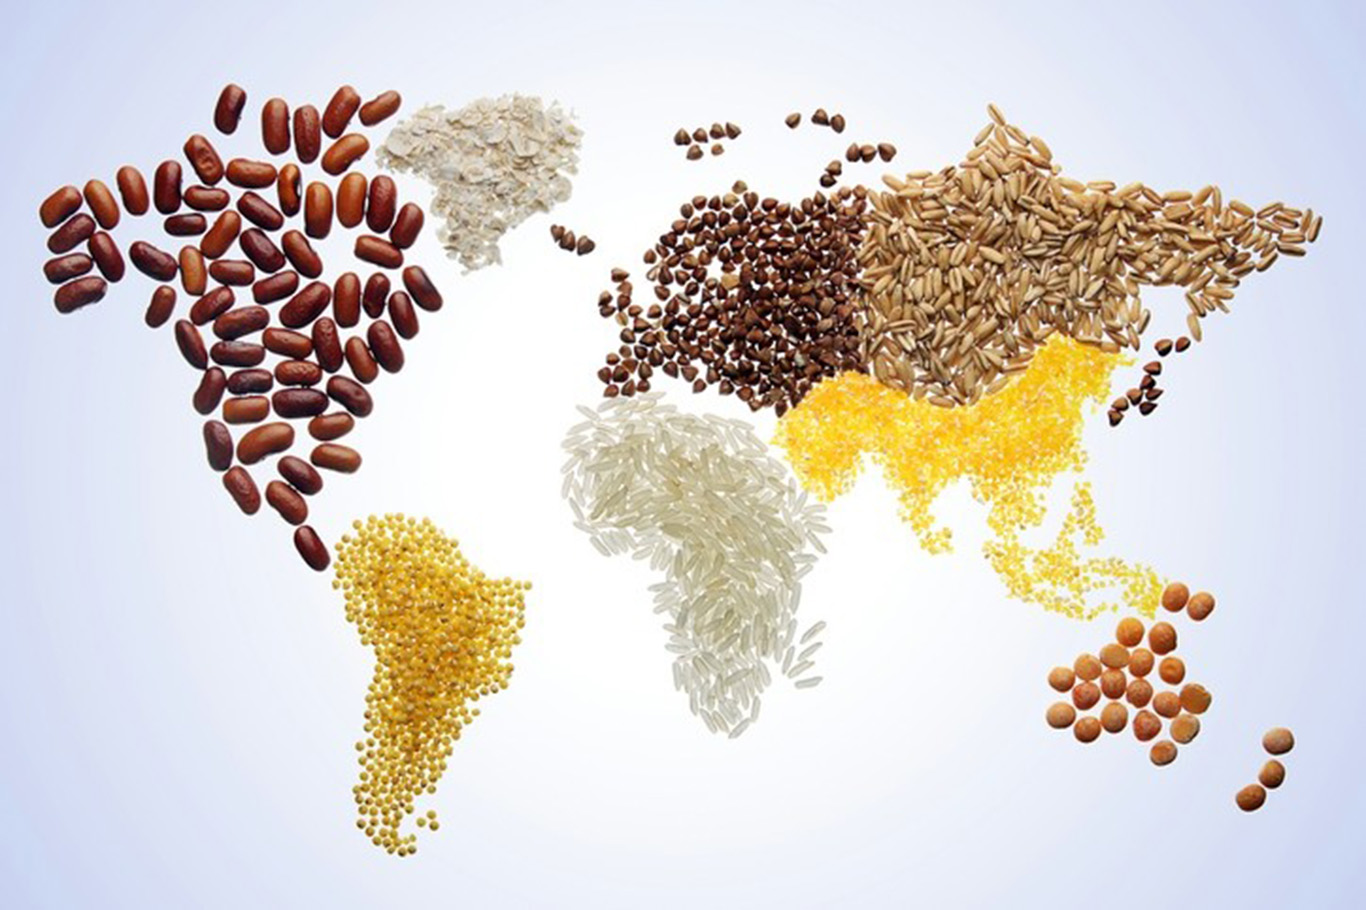 food import costs across the world set to rise to nearly us$2 trillion—fao - [i̇lkha] principle news agency [i̇lkha]